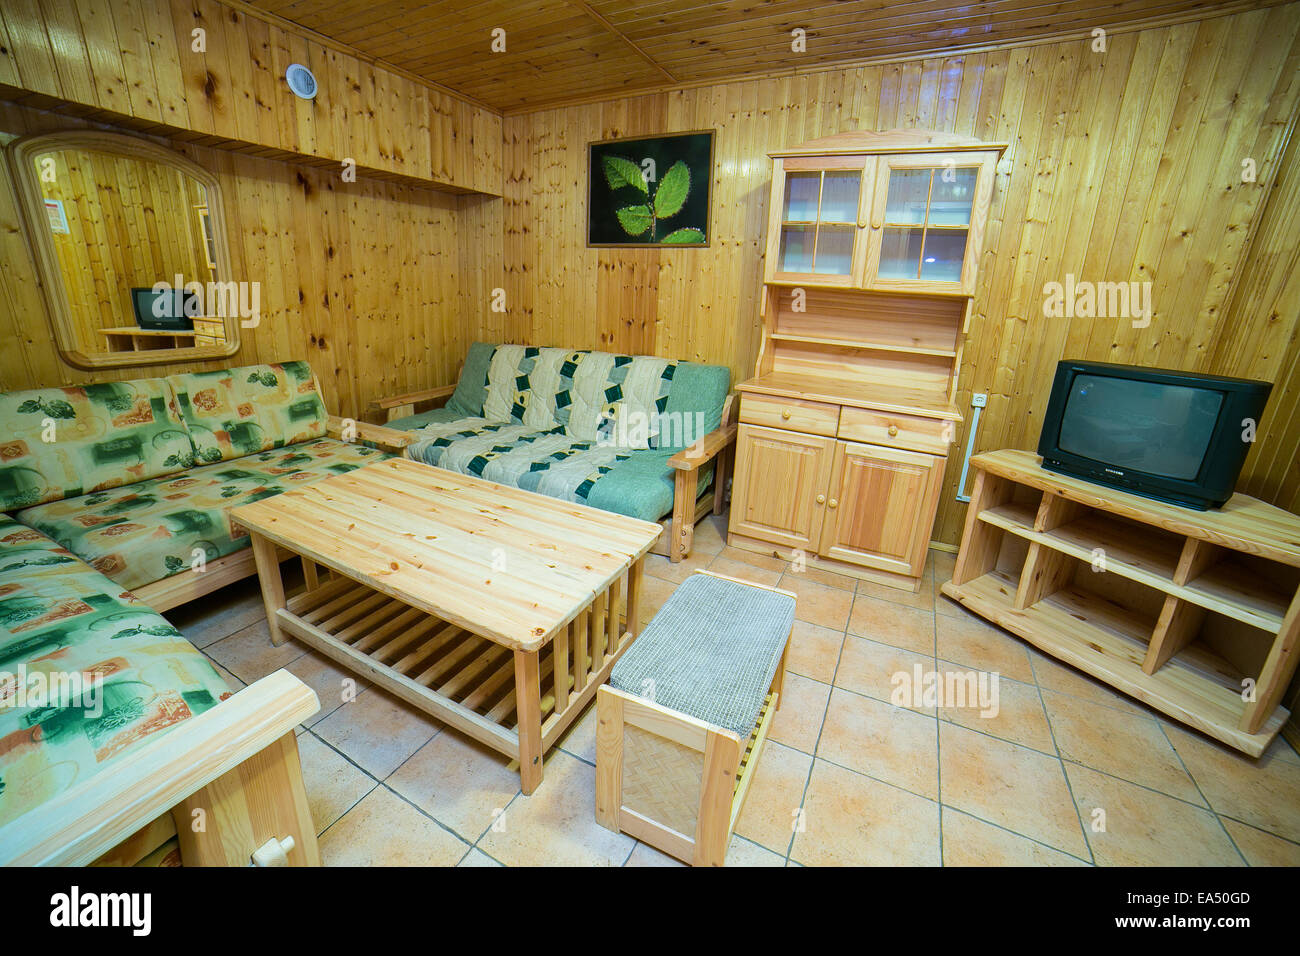 Room in wooden house interior Stock Photo